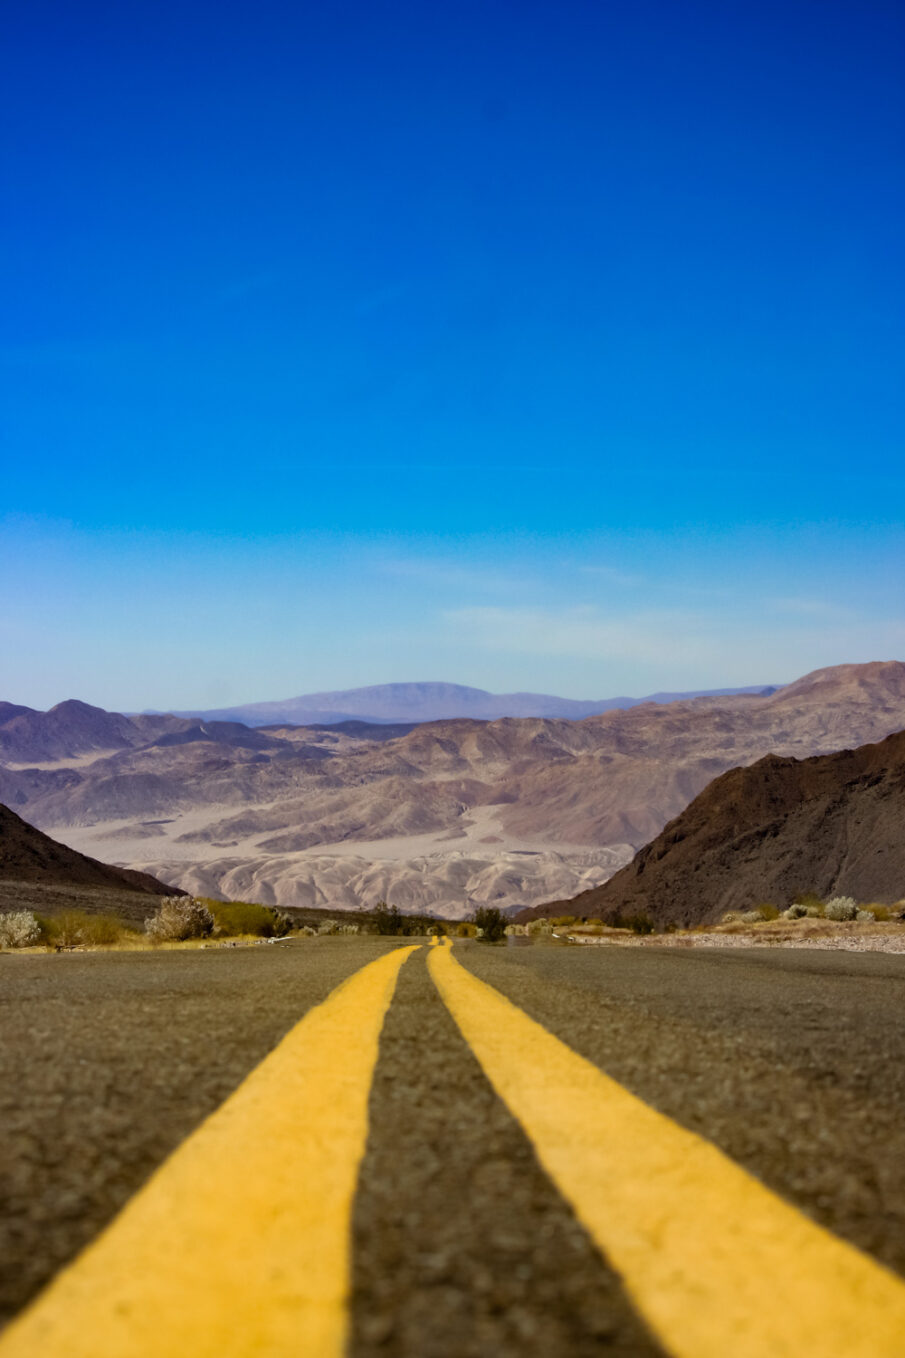 Paint lines down the center of the road with sweeping views of Death Valley National Park in the background